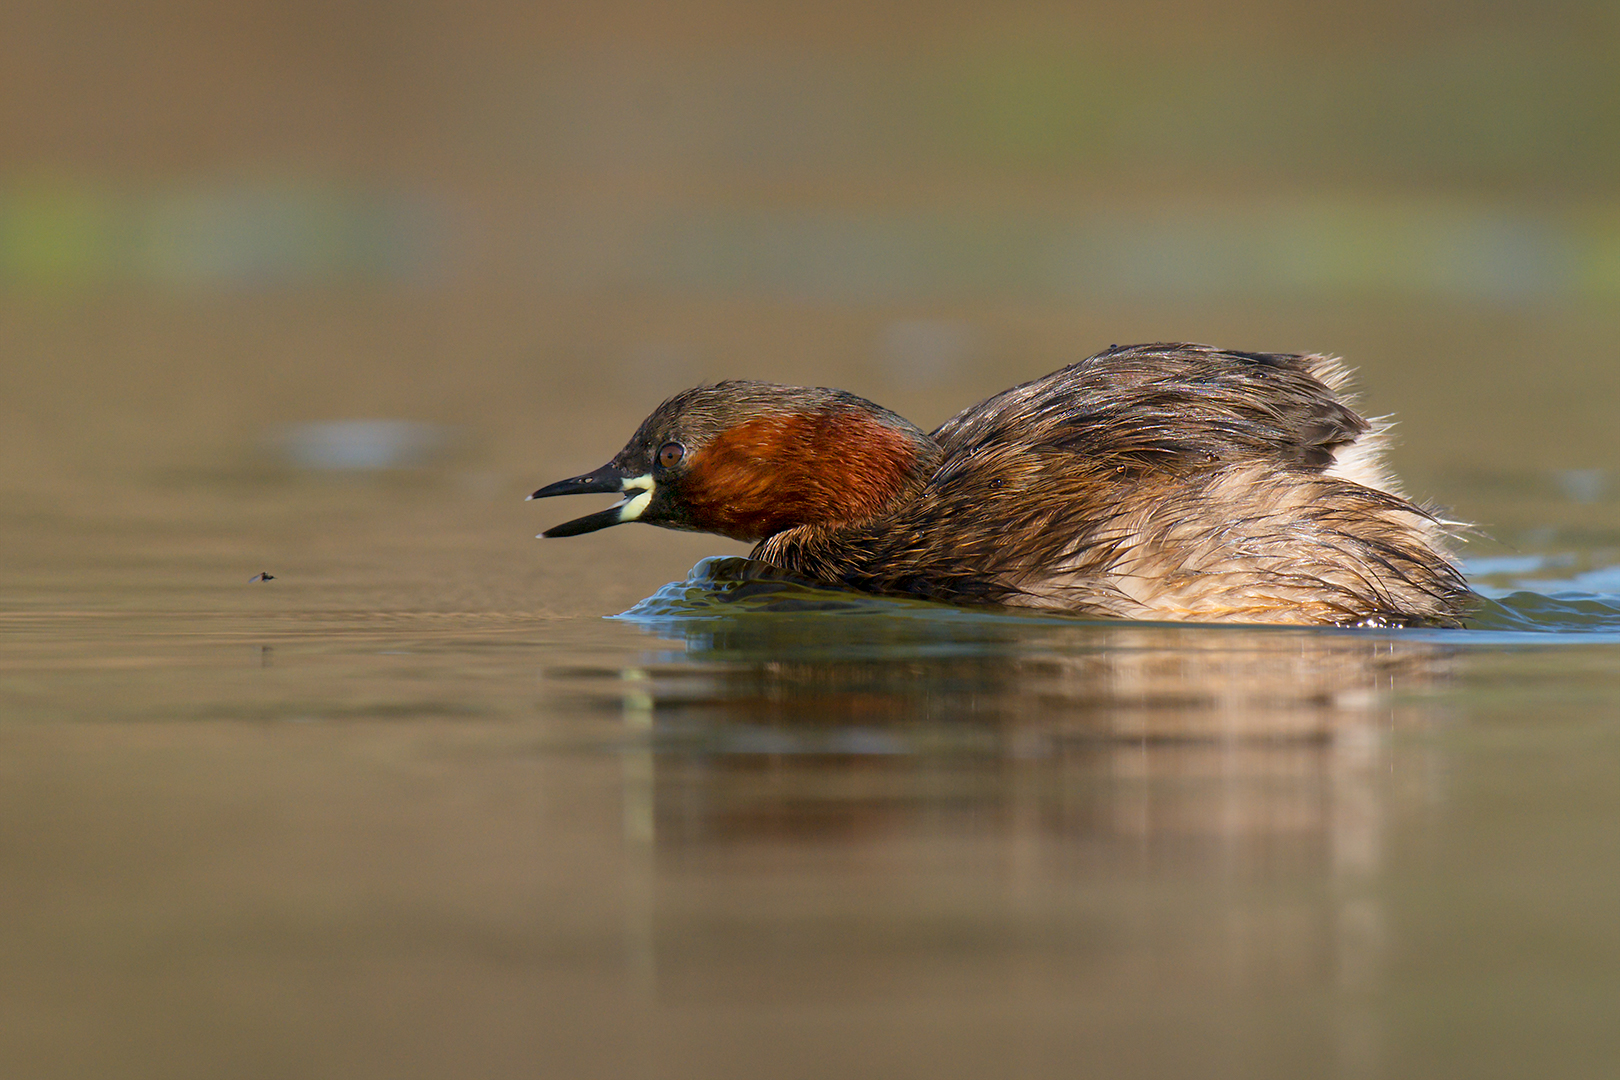 The little grebe and the insect...